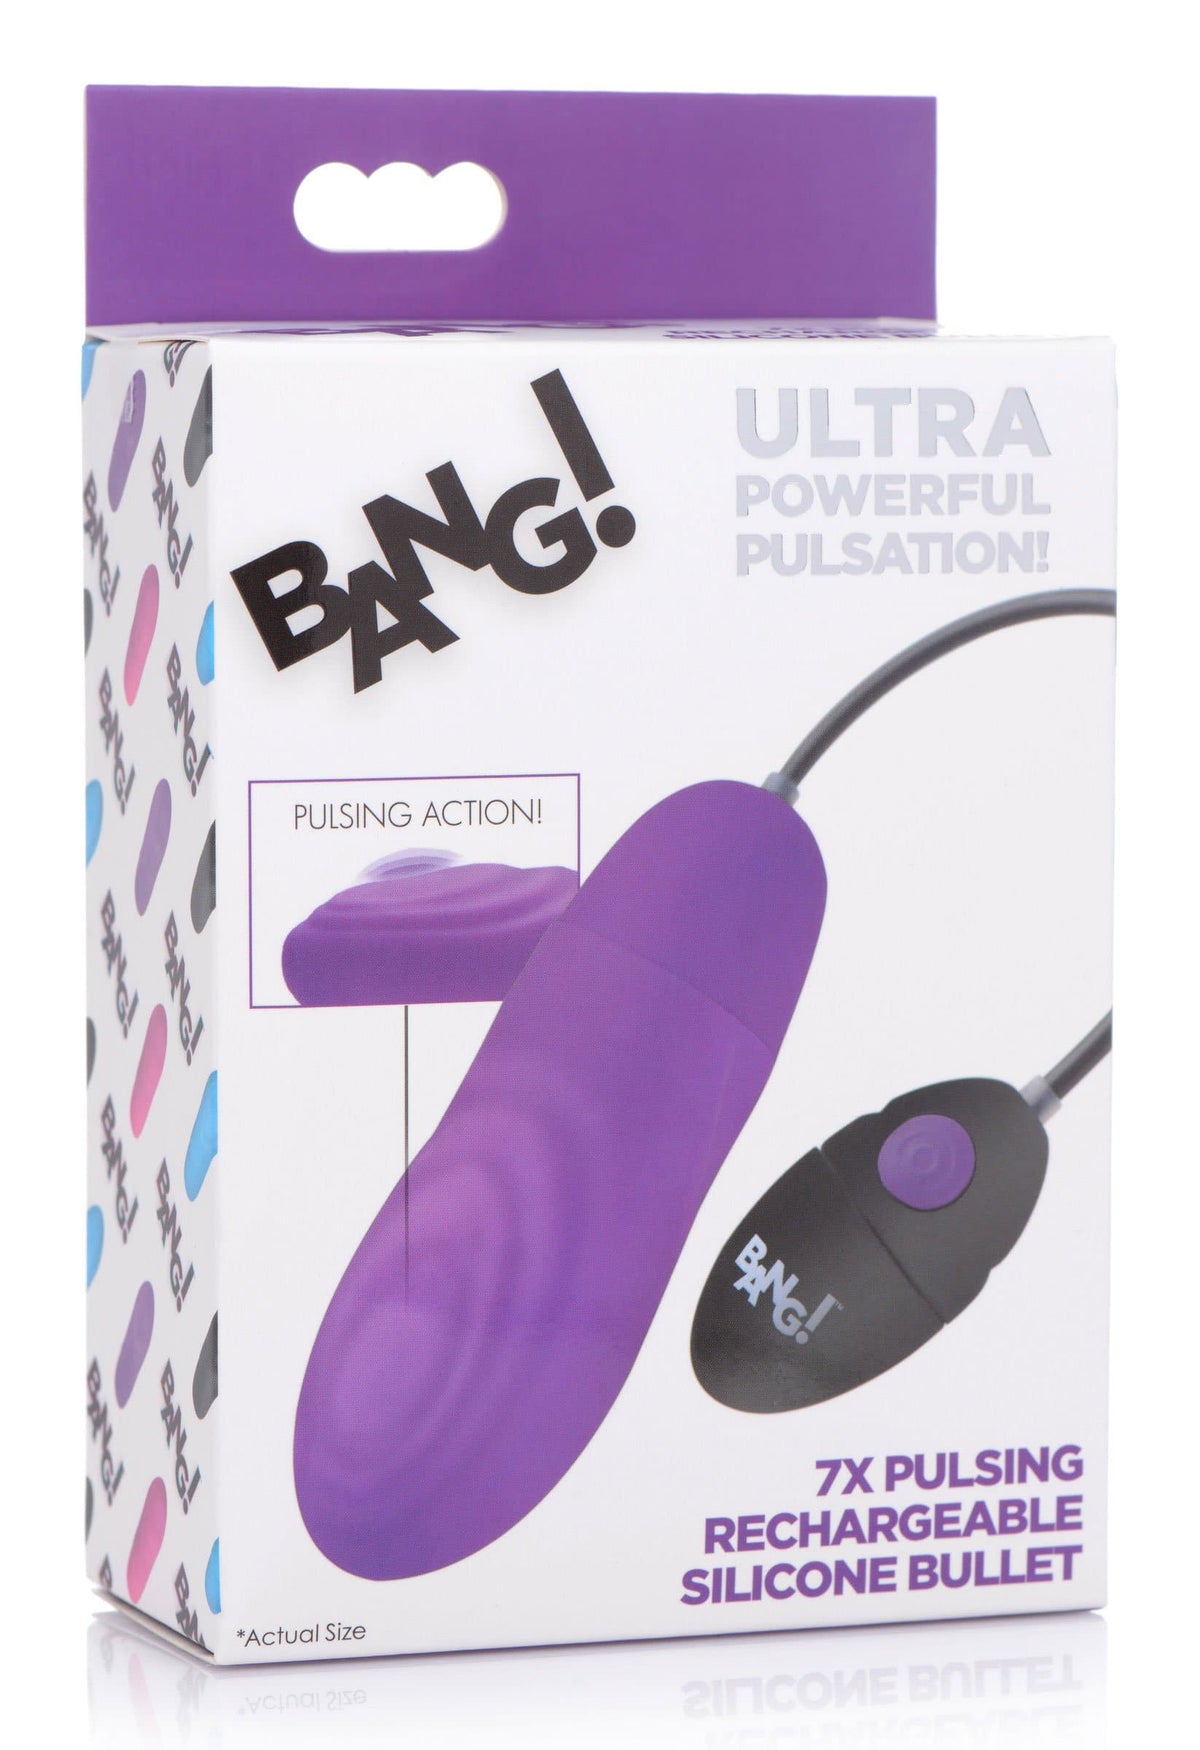 7x pulsing rechargeable silicone bullet purple